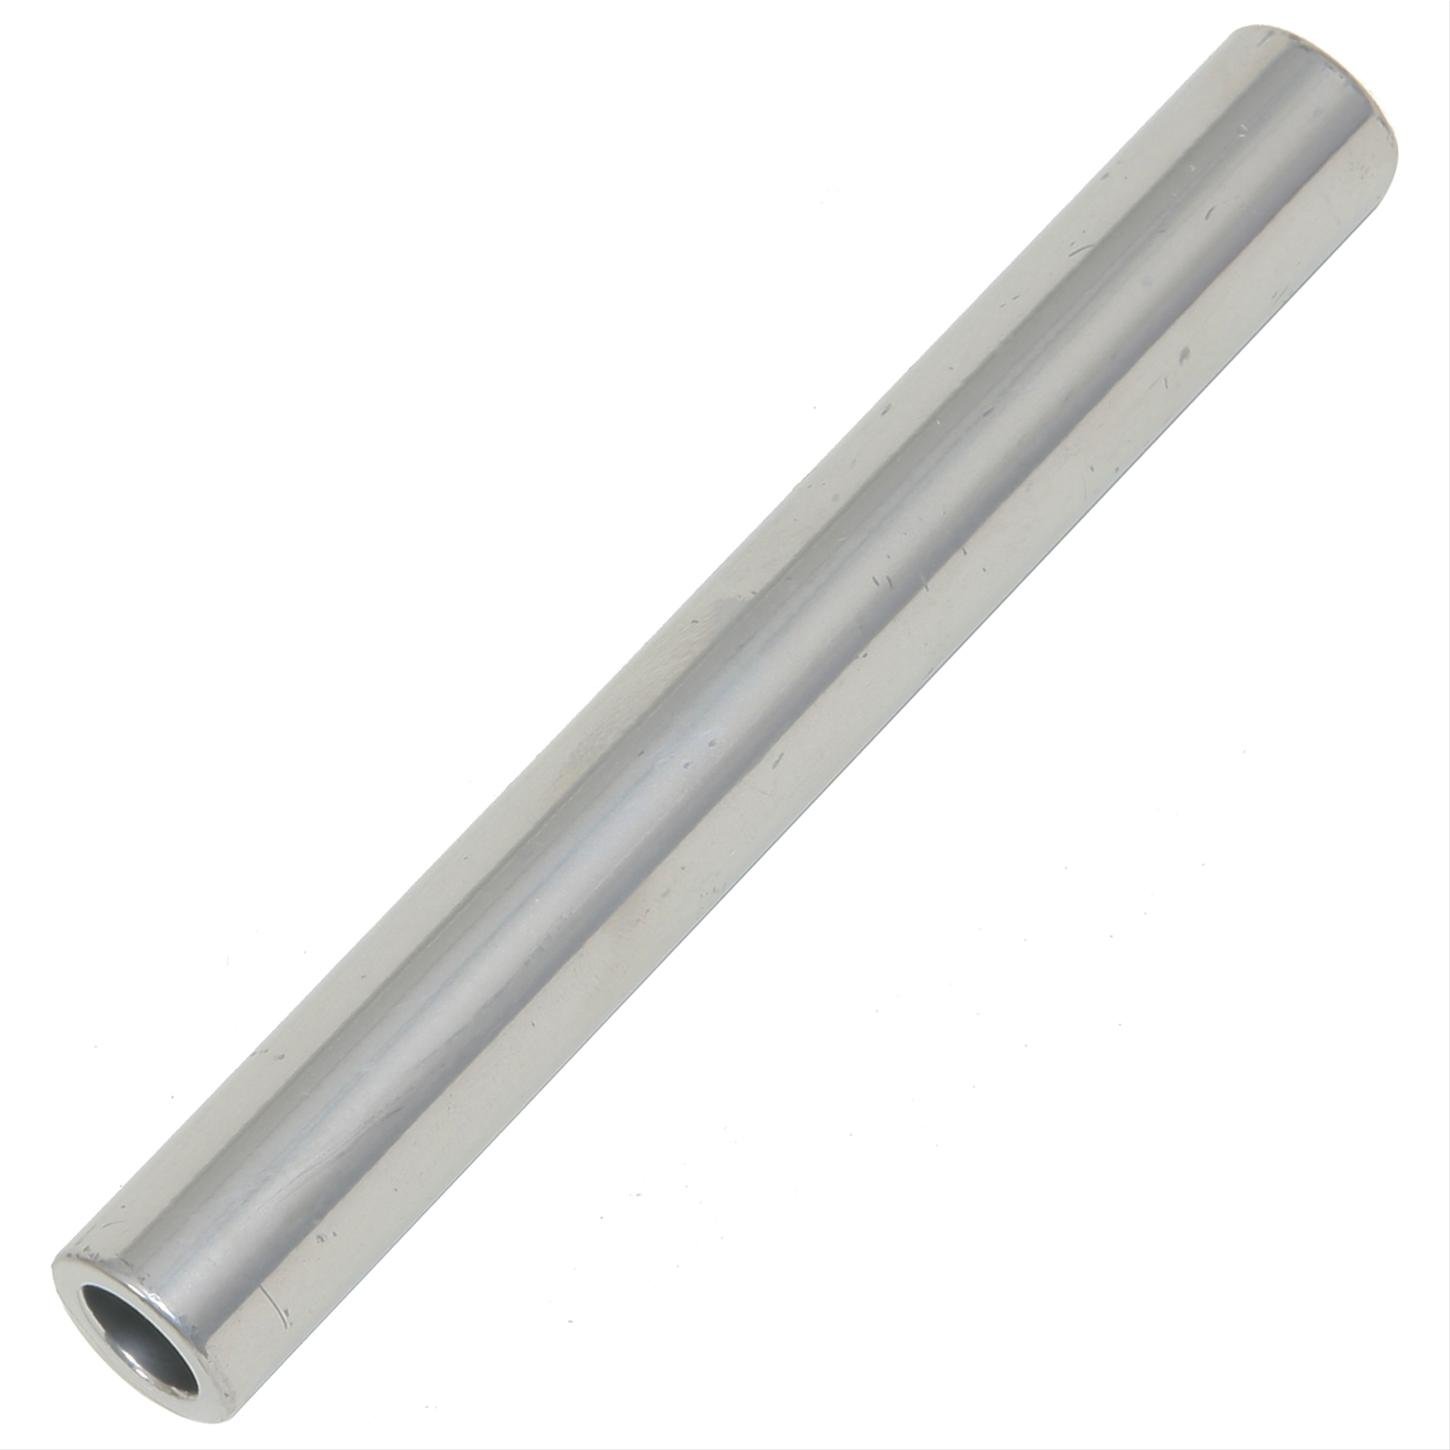 7/16 CLEARANCE ID 5.500 LONG TUBE SPACER